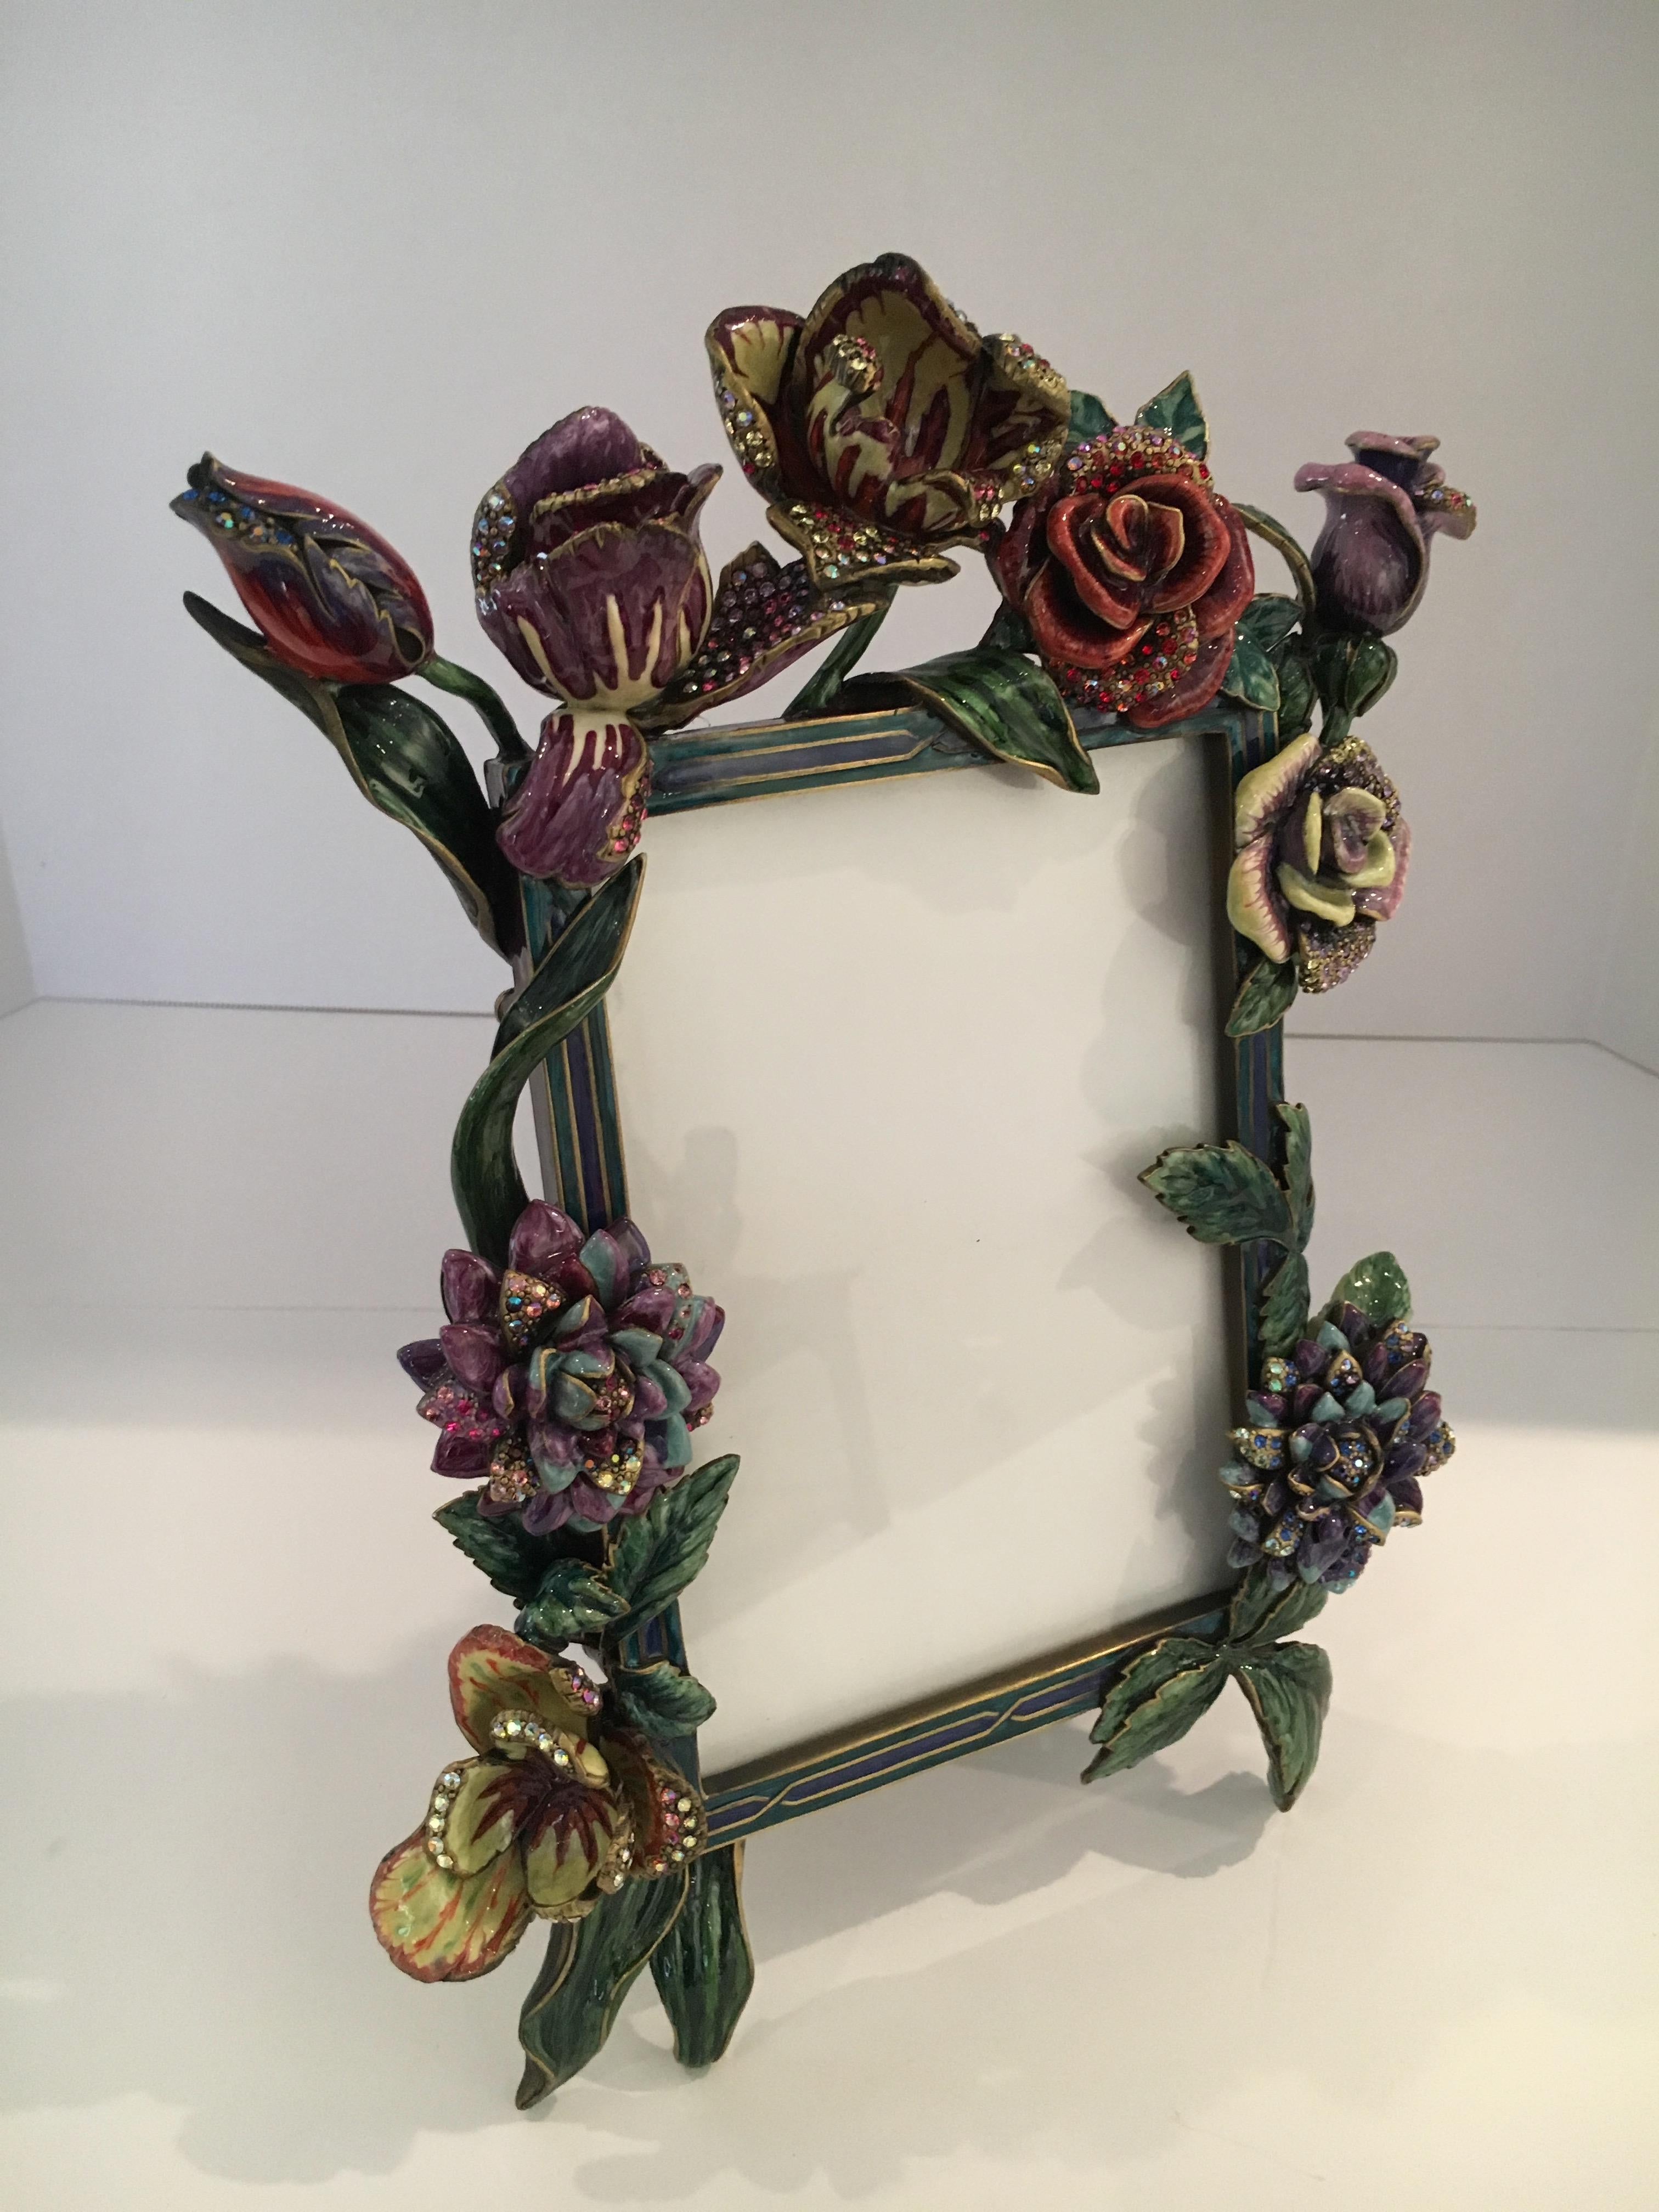 Jay Strongwater bronze and polychrome enamel photo frame - Elaborately designed foliage and flowers - a collectors piece for that perfect person and place!
The image size is 5